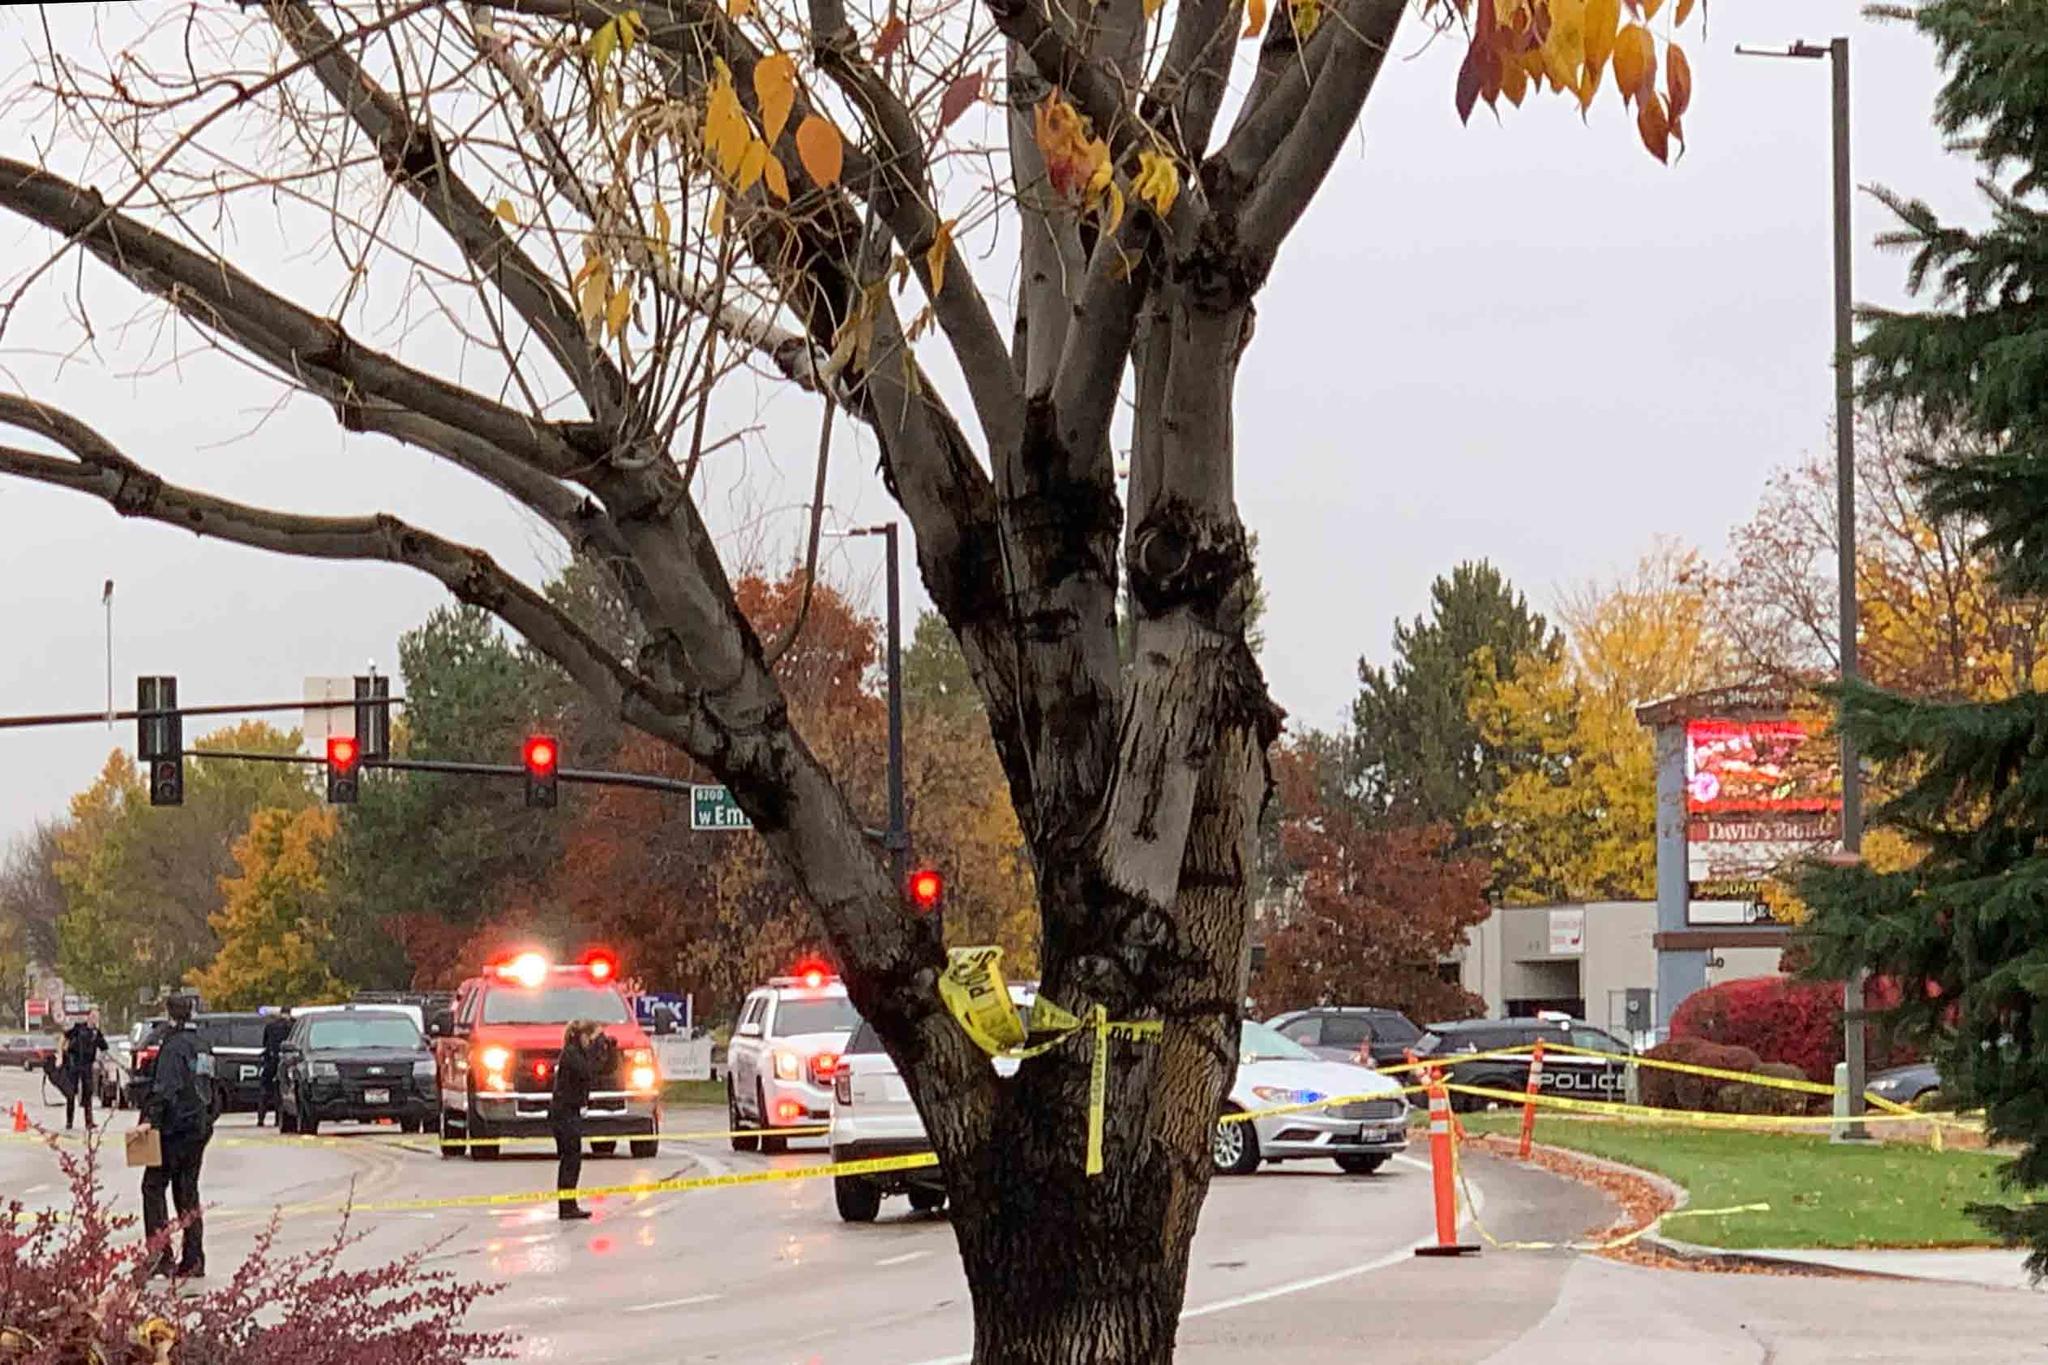 Police close off a street outside a shopping mall after a shooting in Boise, Idaho on Monday, Oct. 25, 2021. Police said there are reports of multiple injuries and one person is in custody.